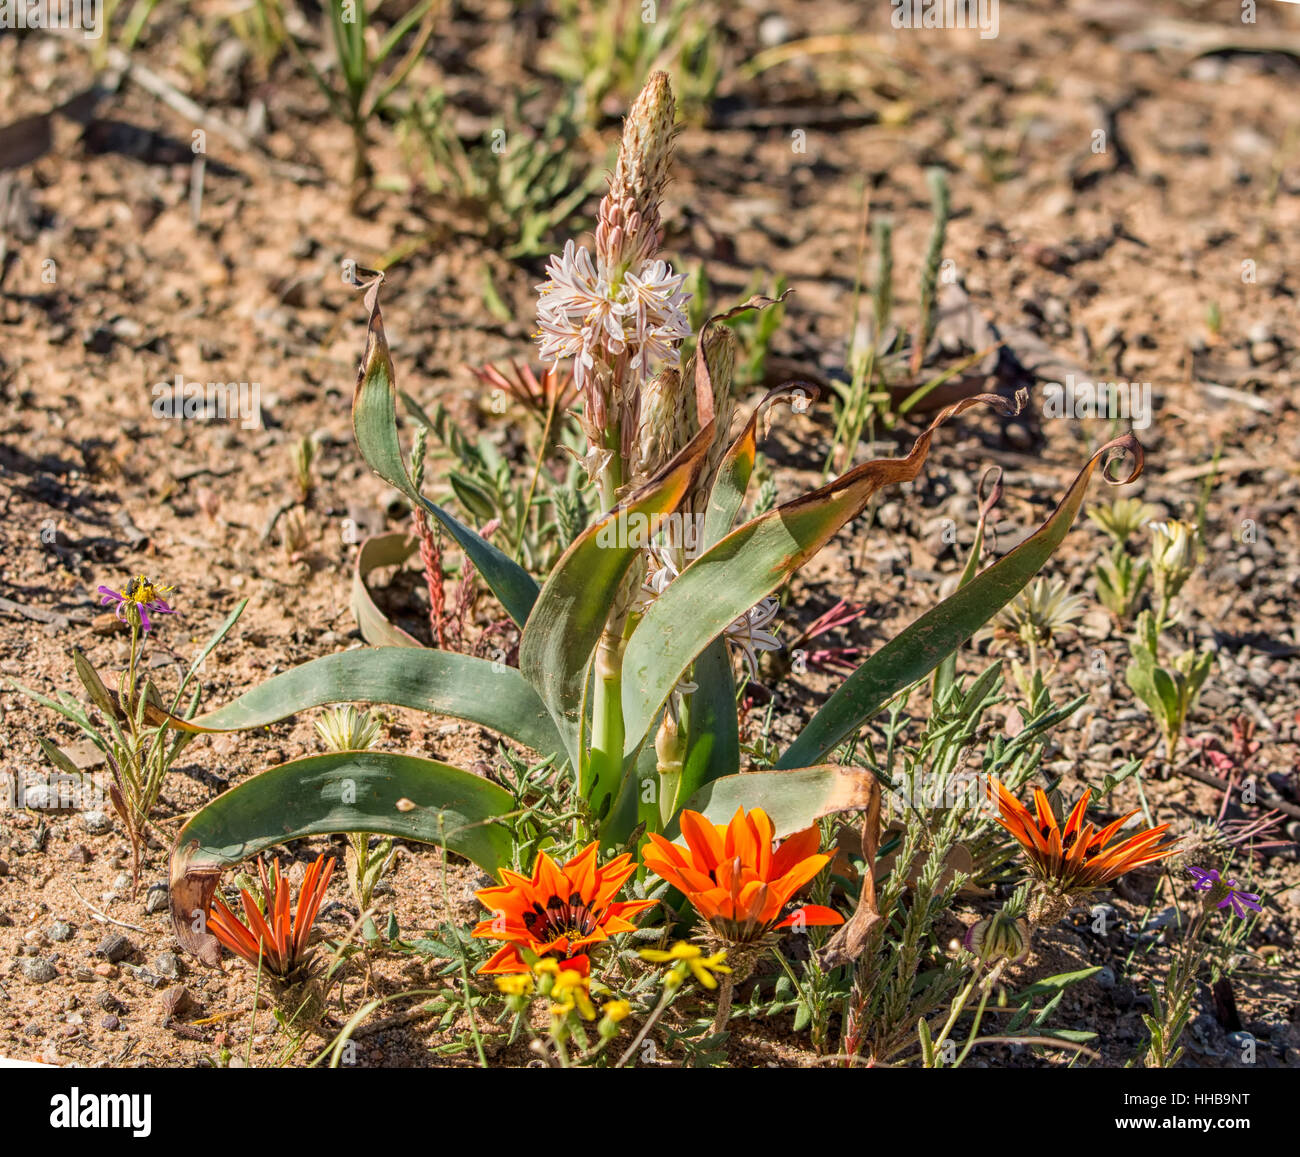 A Trachyandra falcata wildflower in the Namaqualand, South Africa Stock Photo